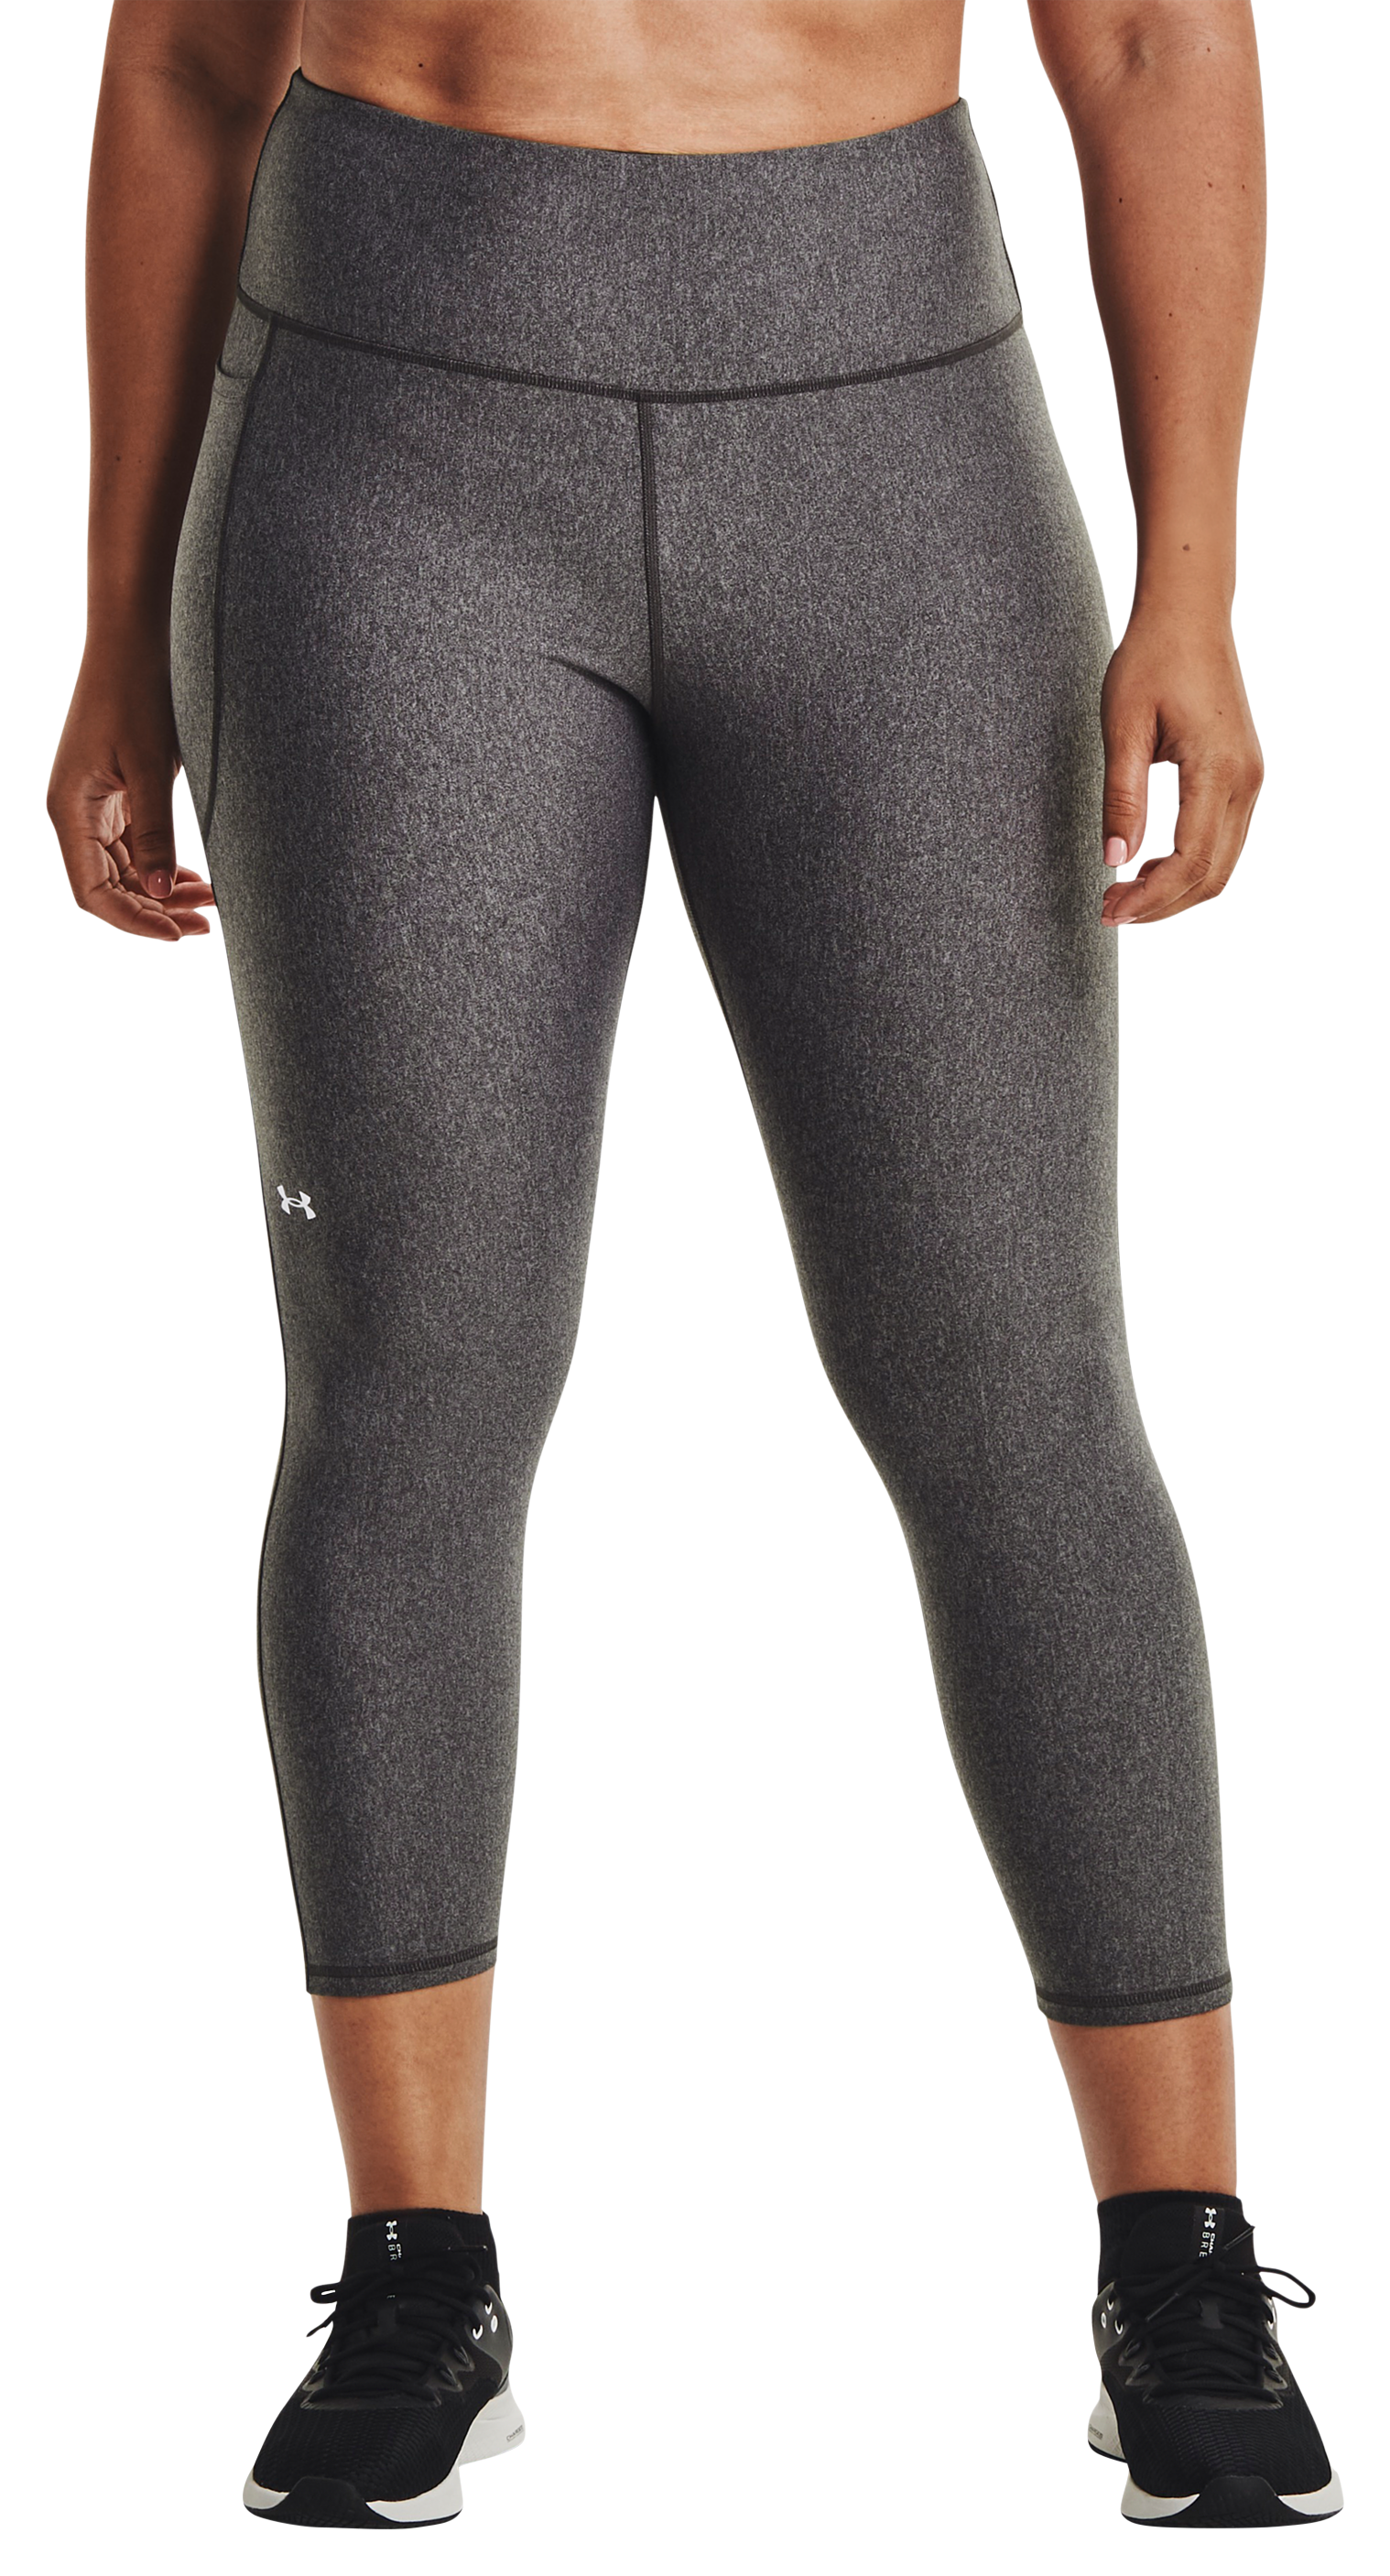 Under Armour HeatGear Armour No-Slip Waistband Ankle Leggings for Ladies - Charcoal Light Heather/White - L - Short